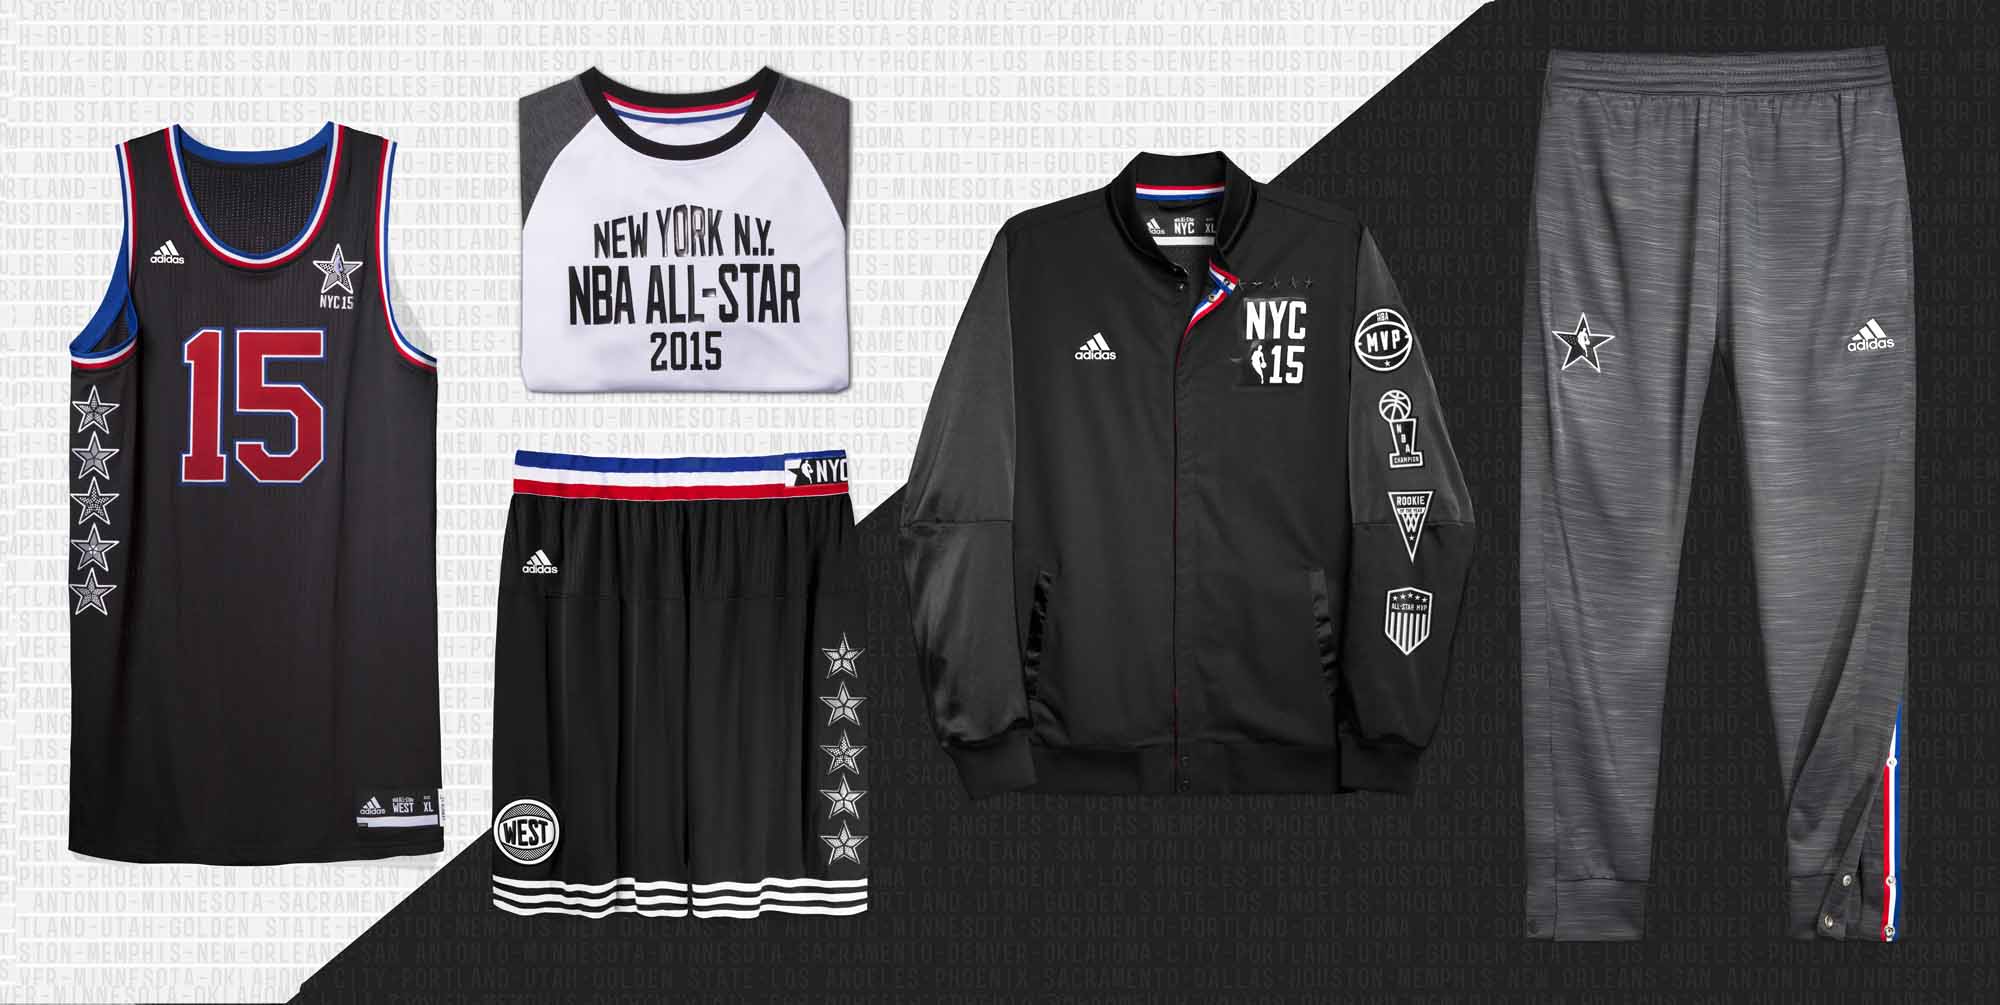 adidas Men's All-Star Game NBA Jerseys for sale